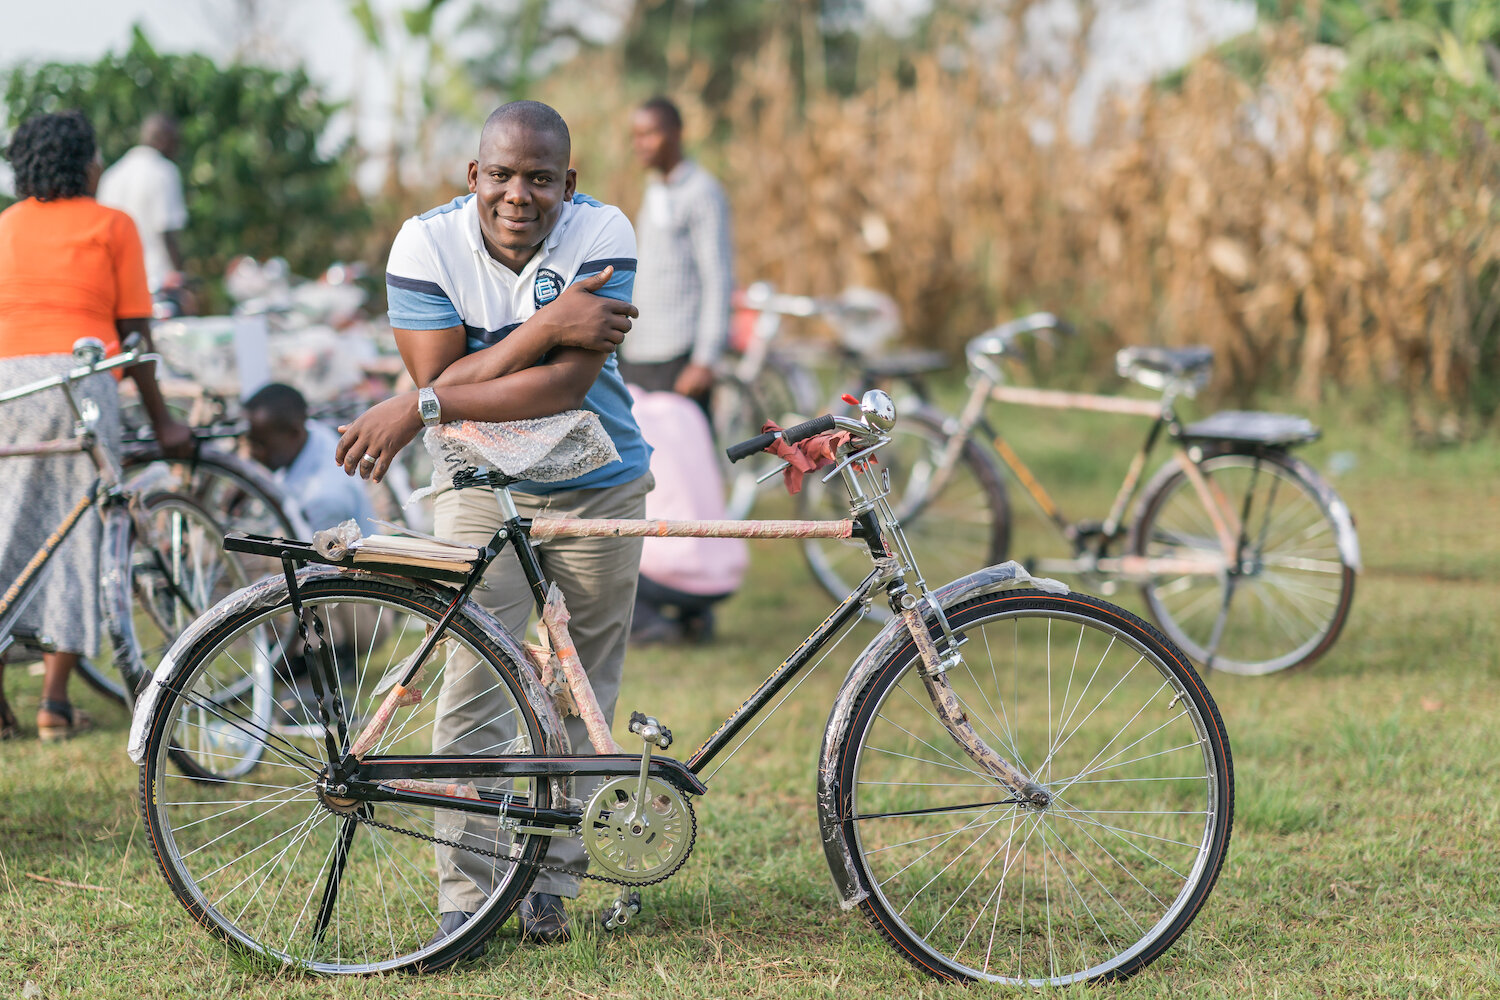 geoffrey, pact’s executive director, leans on bicycle